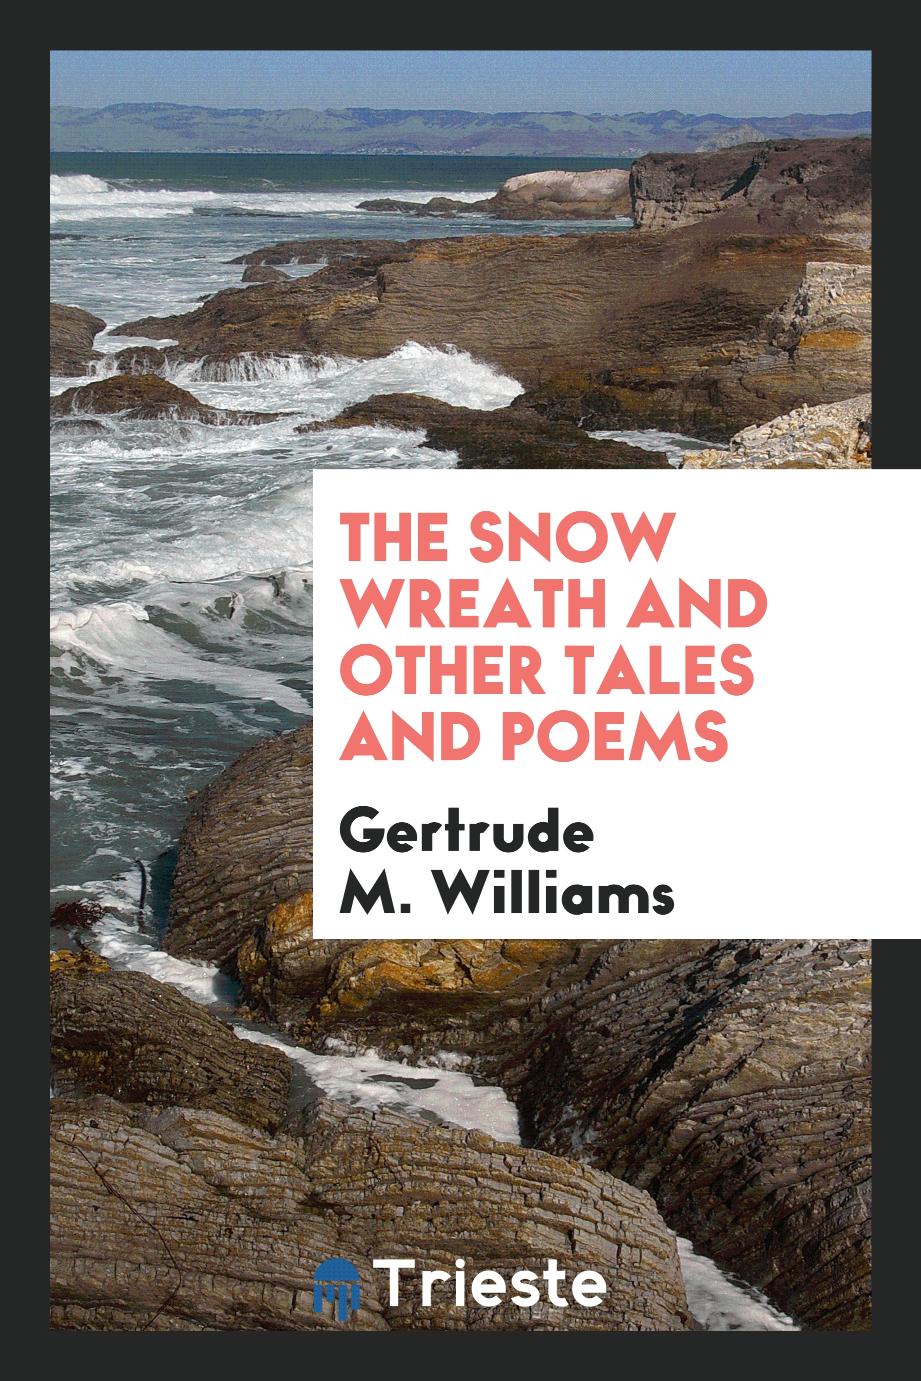 The snow wreath and other tales and poems